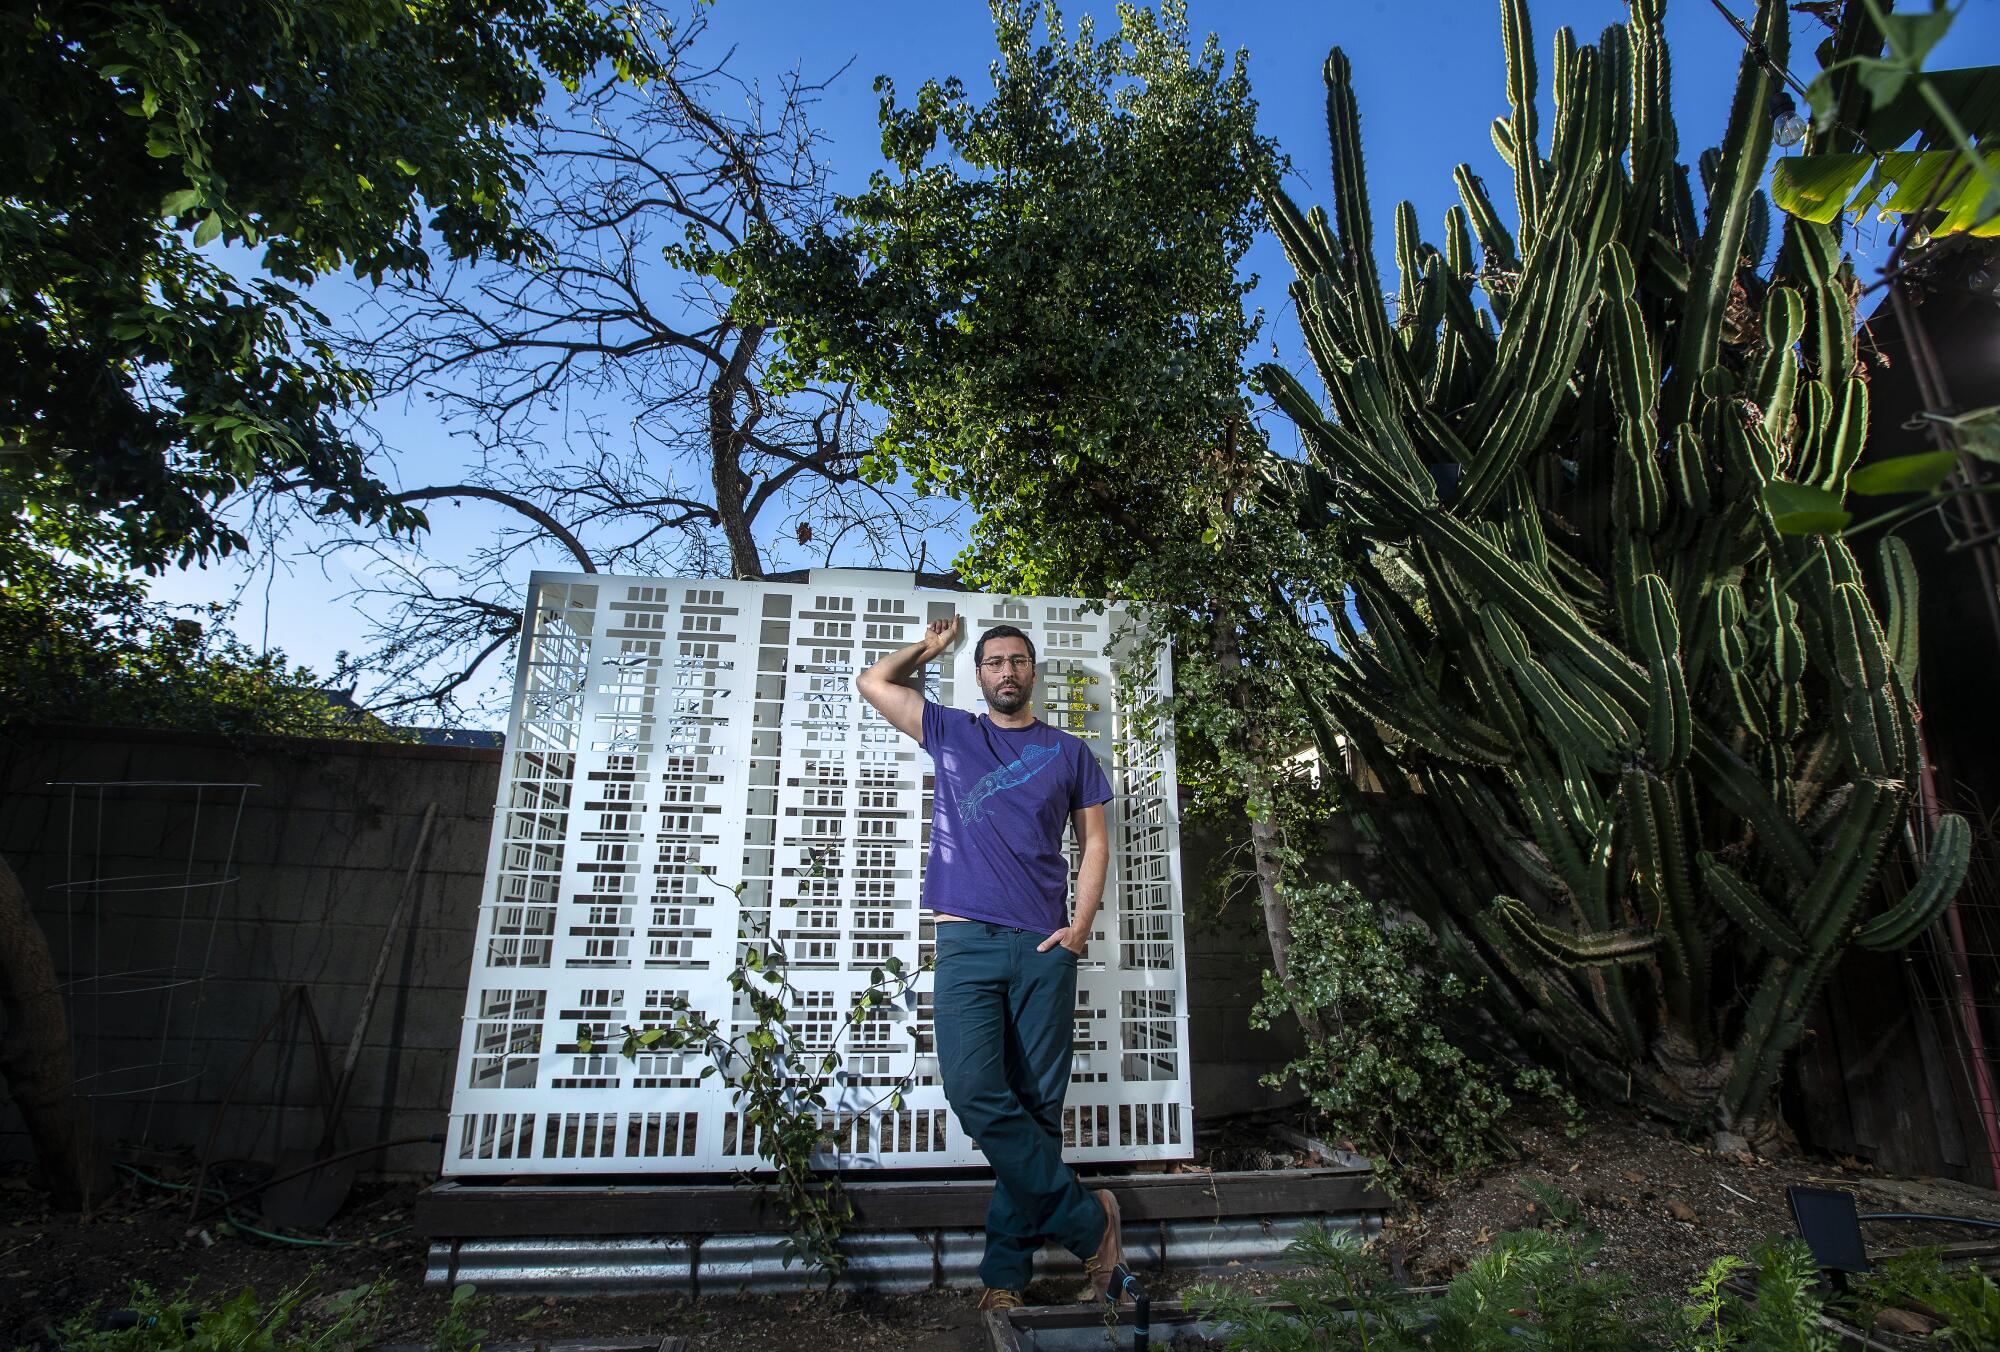 director Lars Jan photographed in his Echo Park backyard with one his laser-cut aluminum sculptures.